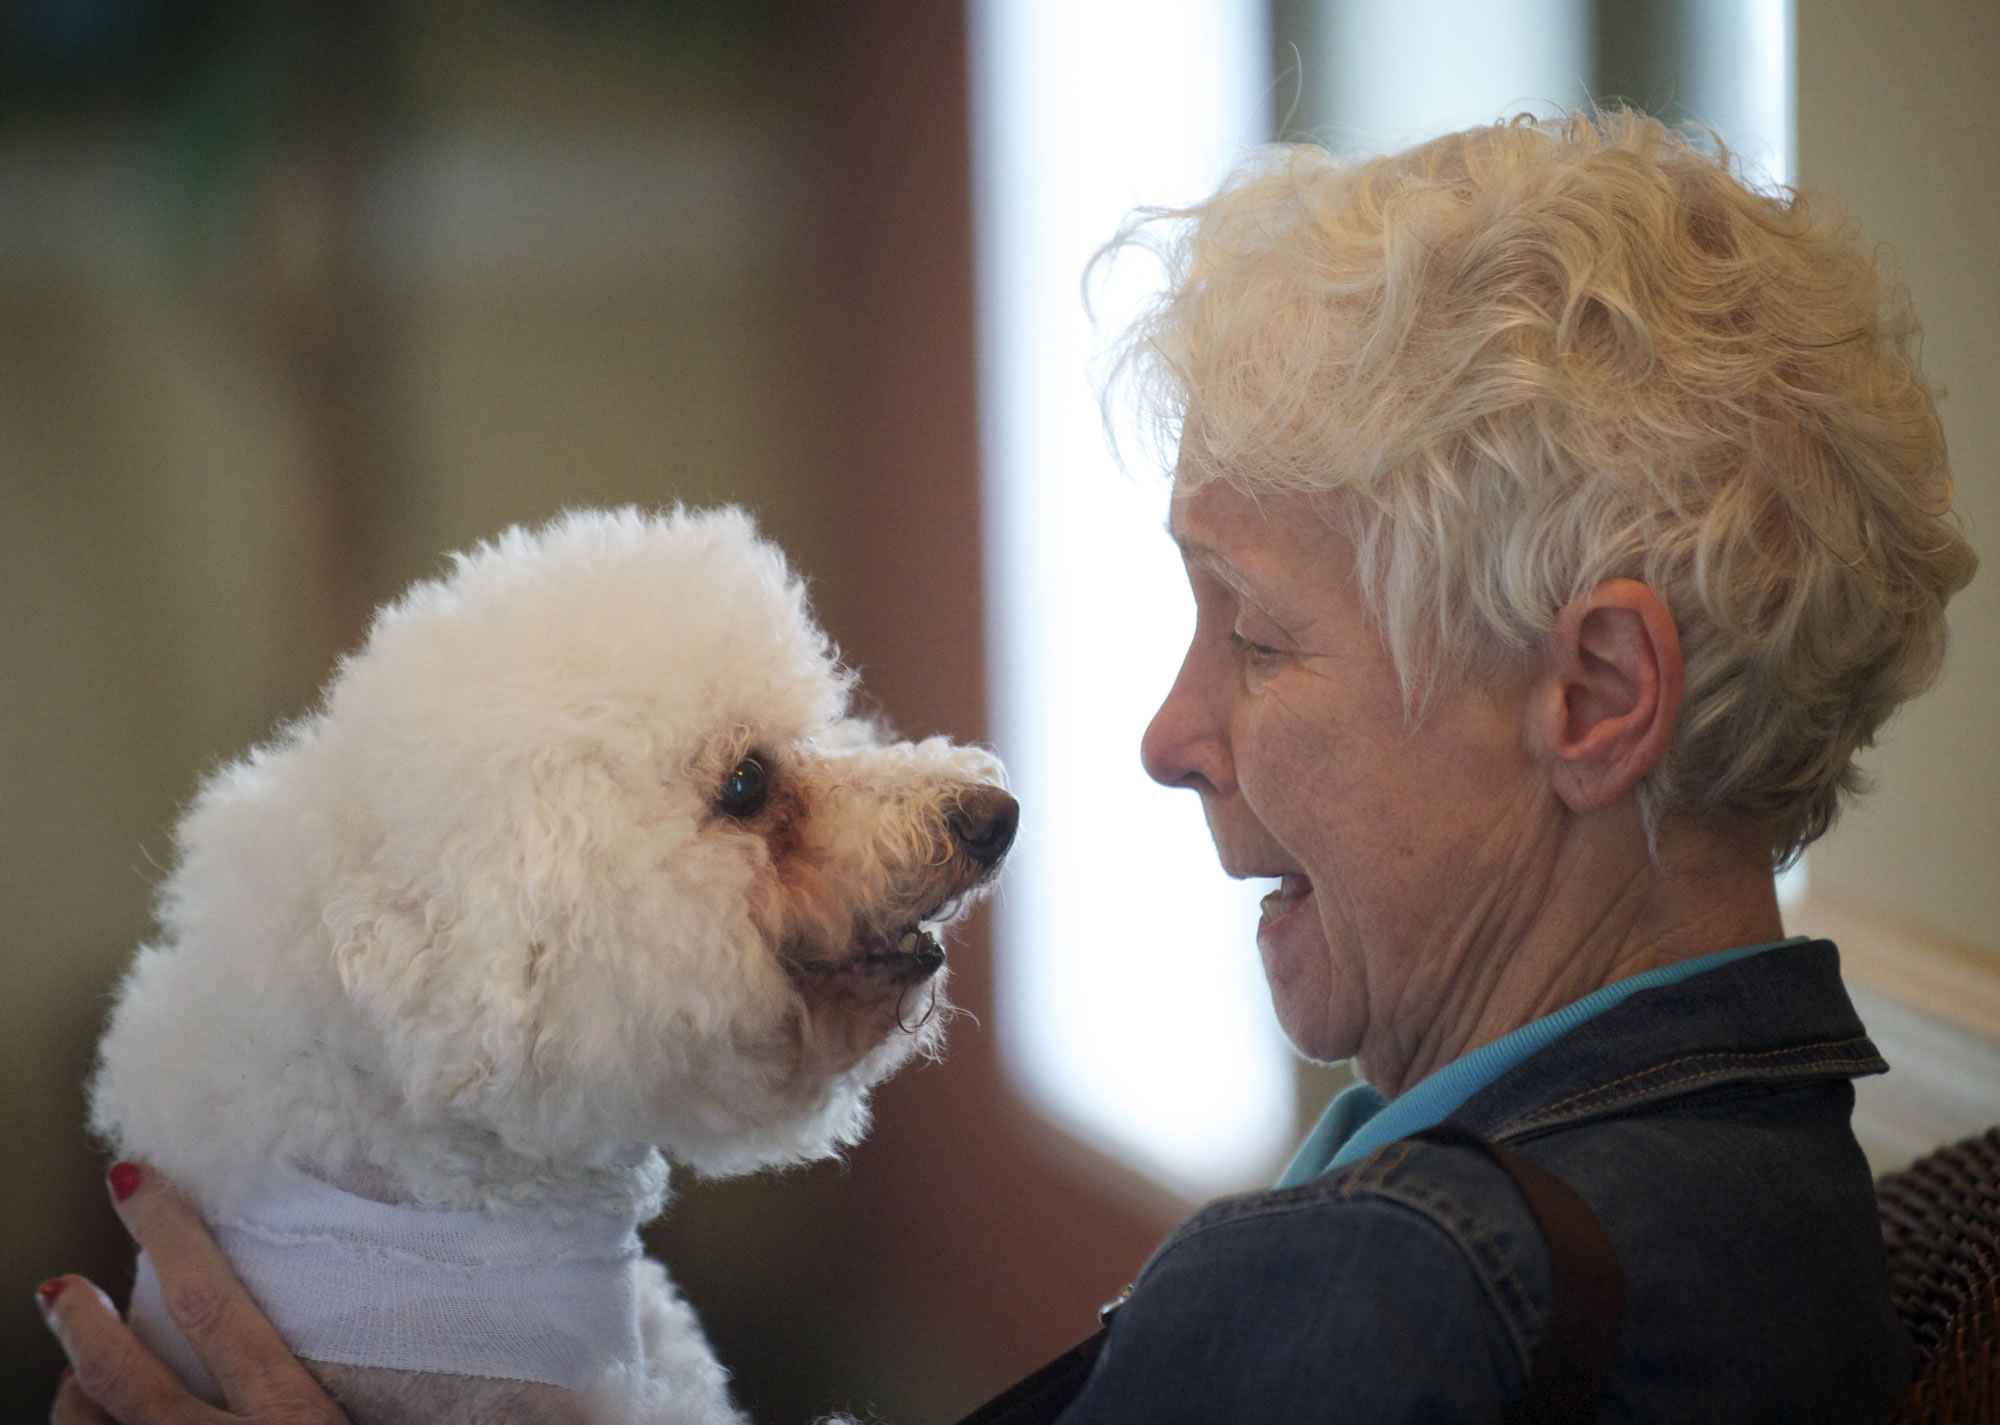 Sylvia Reed, 78, is reunited with her dog Sparky after his trip from Pullman, where he had lung surgery at the Veterinary Teaching Hospital at Washington State University.